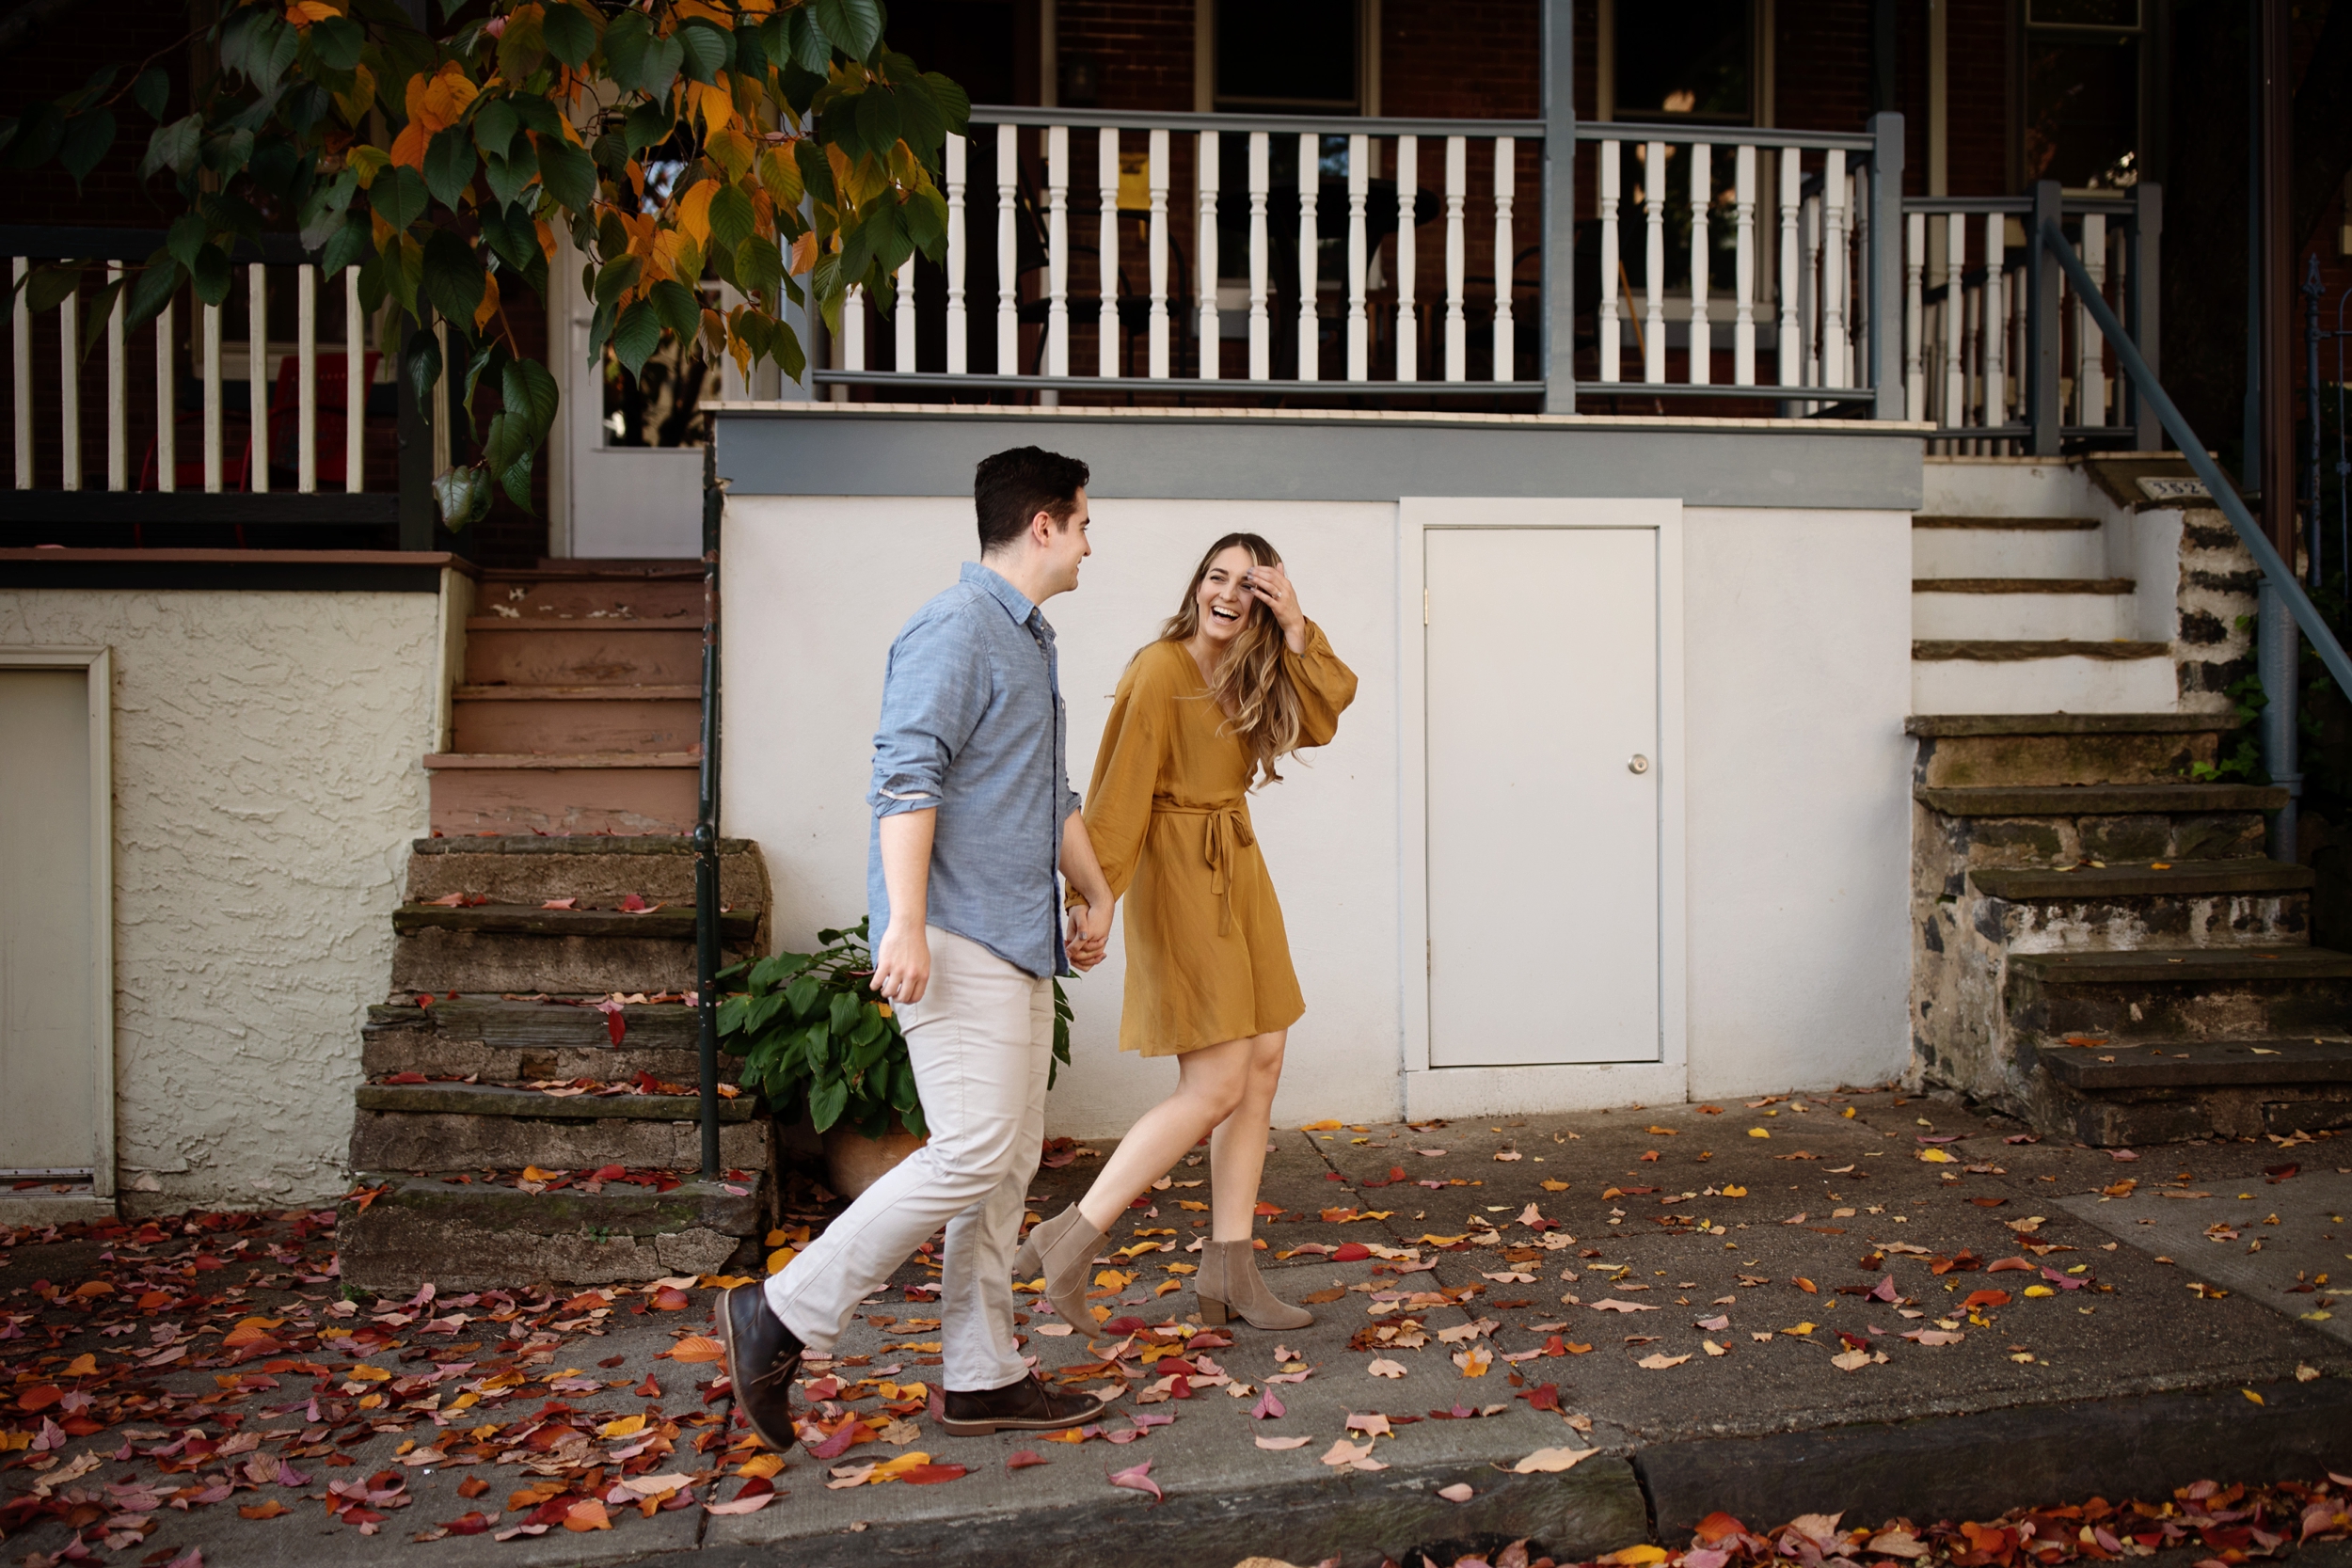 East Falls Philadelphia Engagement Photo Session Couple strolling through their neighbor in very authentic and romantic fall engagement photos. A woman wearing a wrapped mustard yellow dress and the man wearing denim blue button up and khaki pants, strolling through their Philadelphia neighborhood with their puppy.